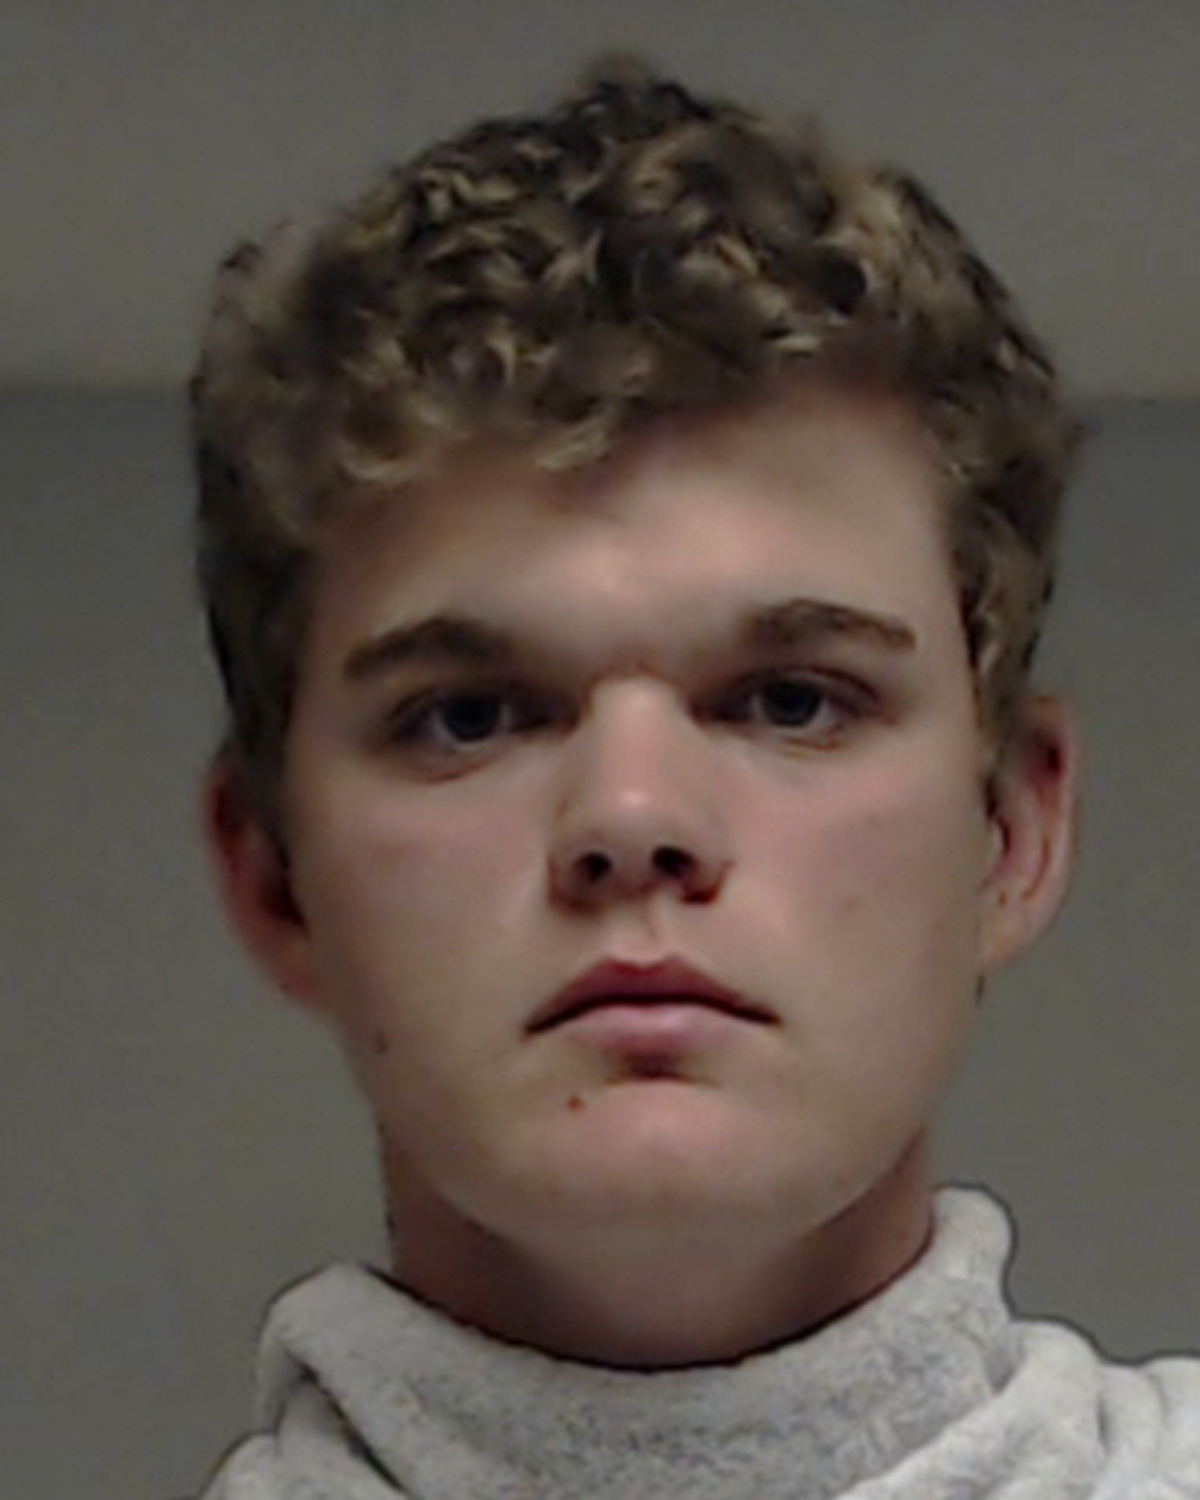 Zachary Alan Holifield, 17, was arrested and charged with two counts of aggravated sexual assault of a child, one count of indecency with a child by contact. The charges carry a $600,000 bond.